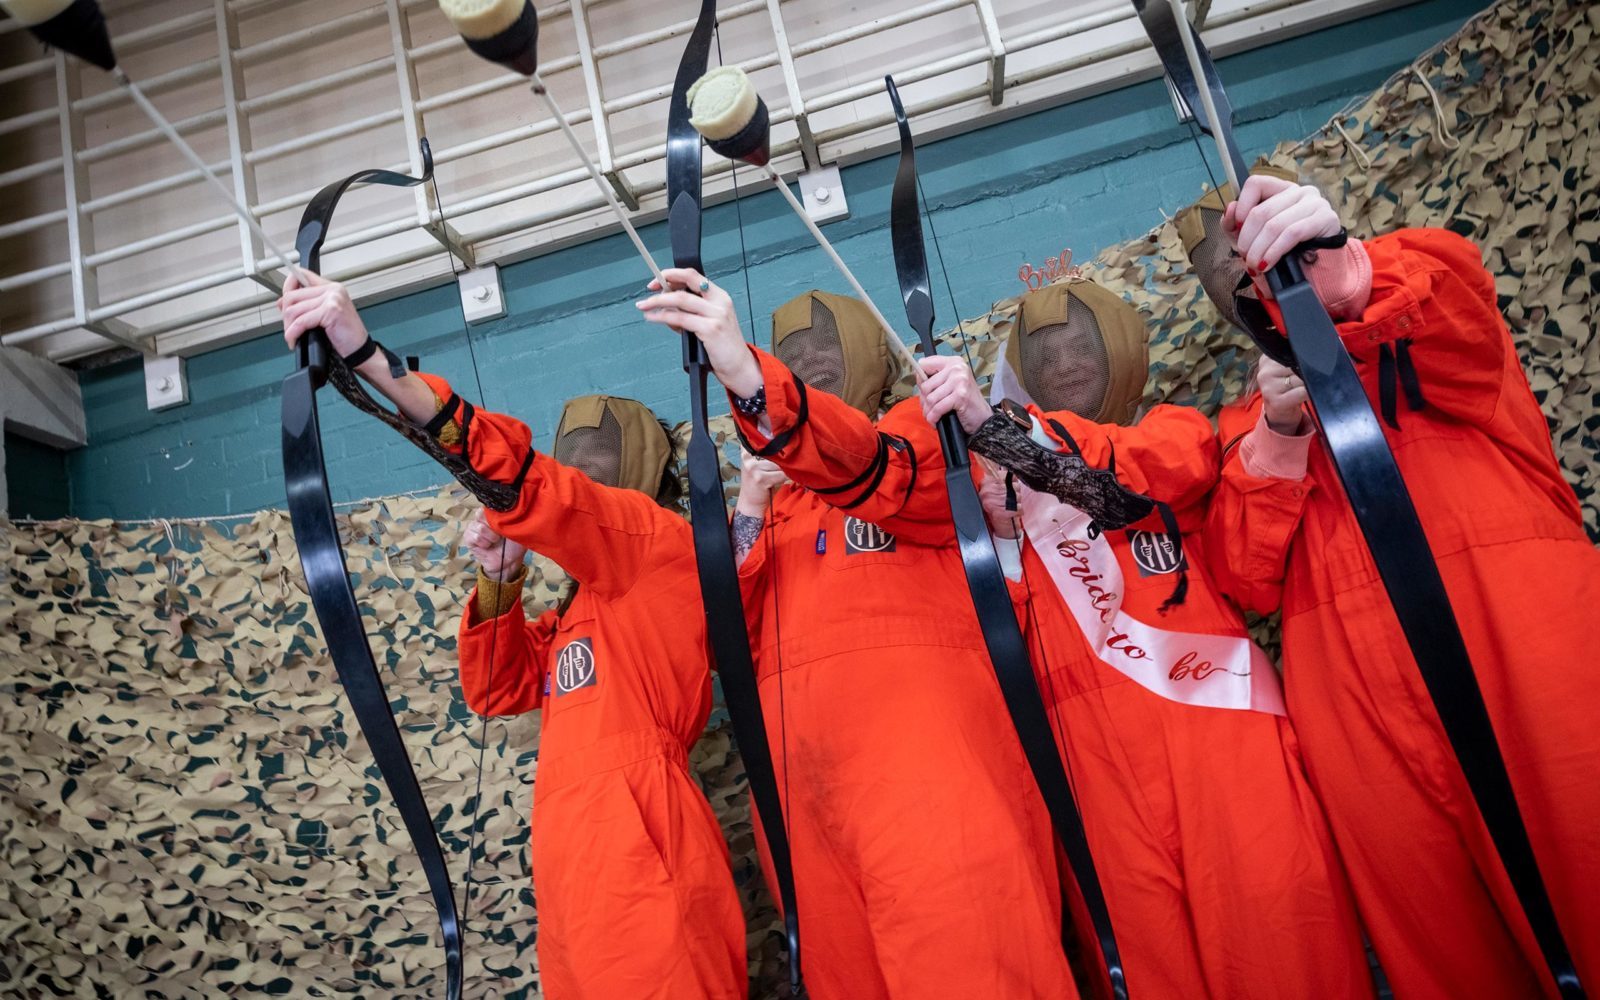 Family Days Out With Archery Wars at Shrewsbury Prison